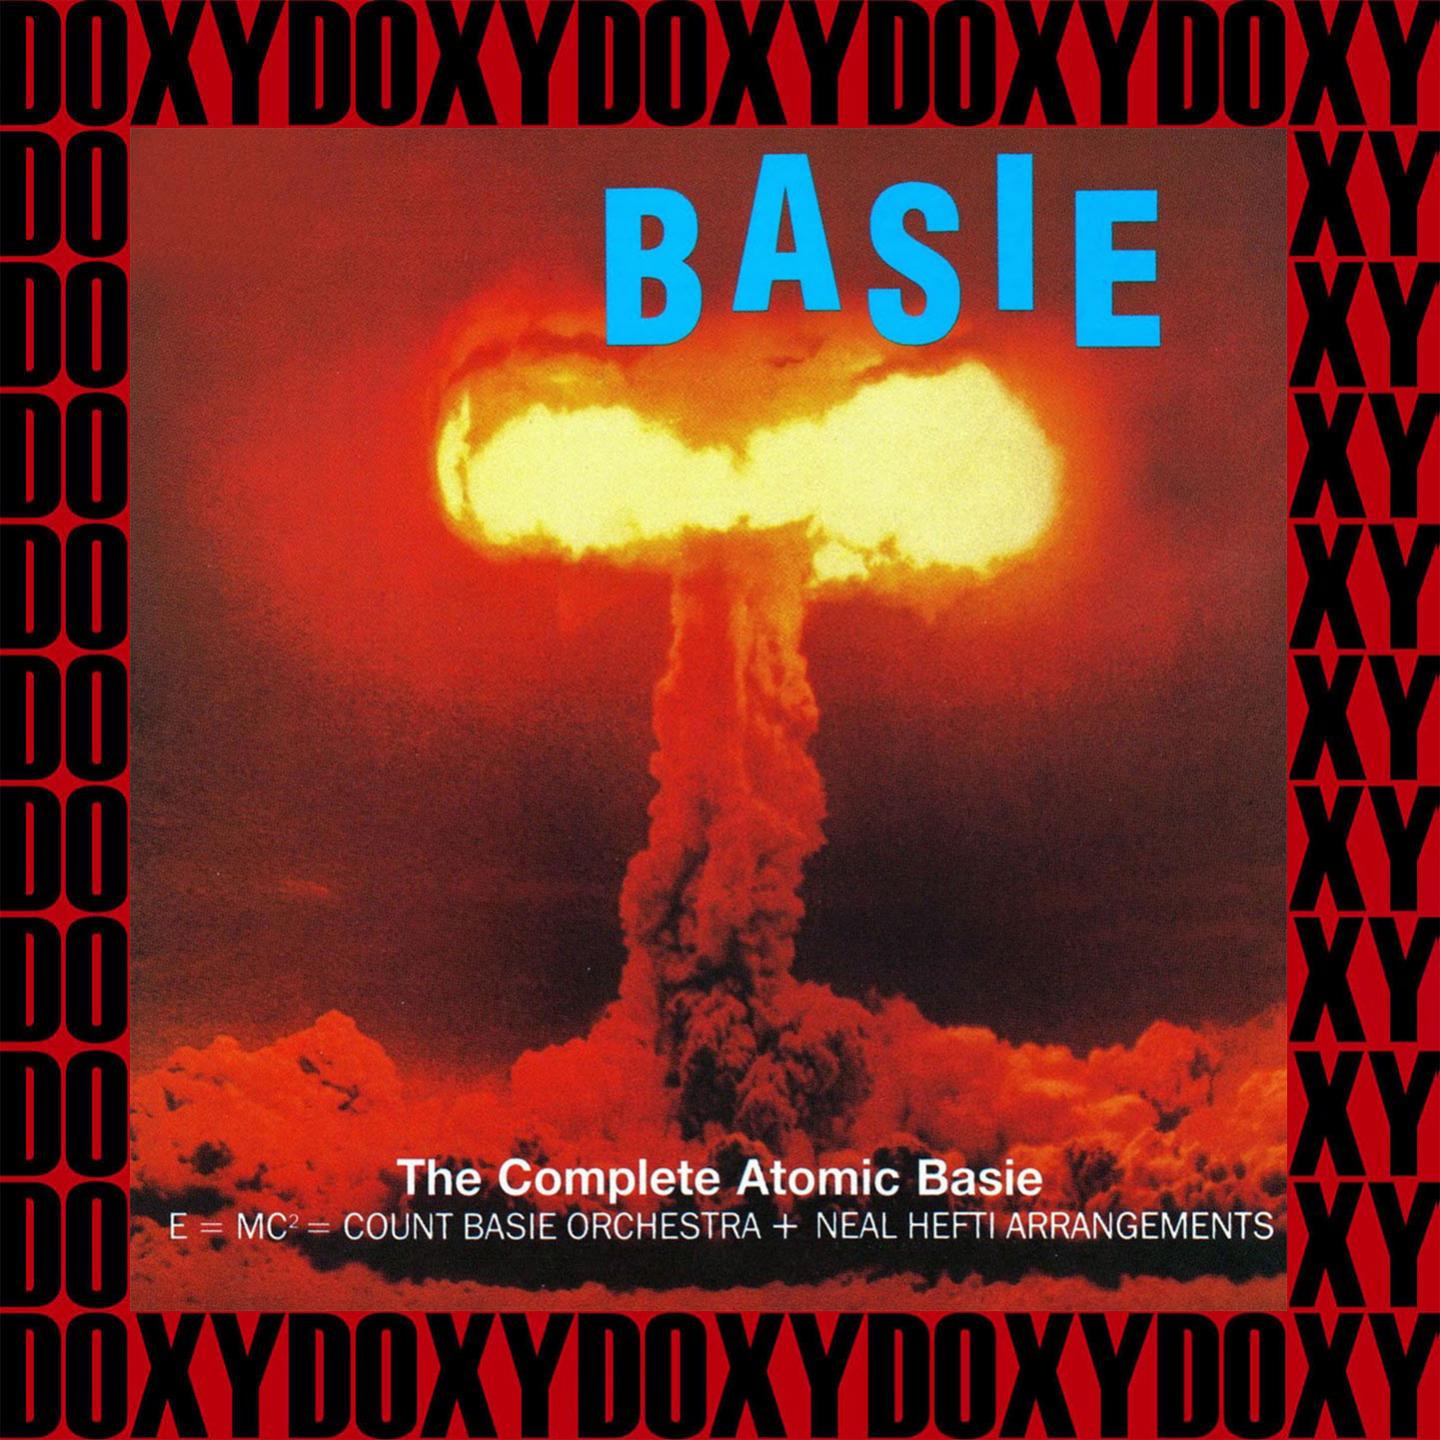 The Complete Atomic Basie (Remastered Version) (Doxy Collection)